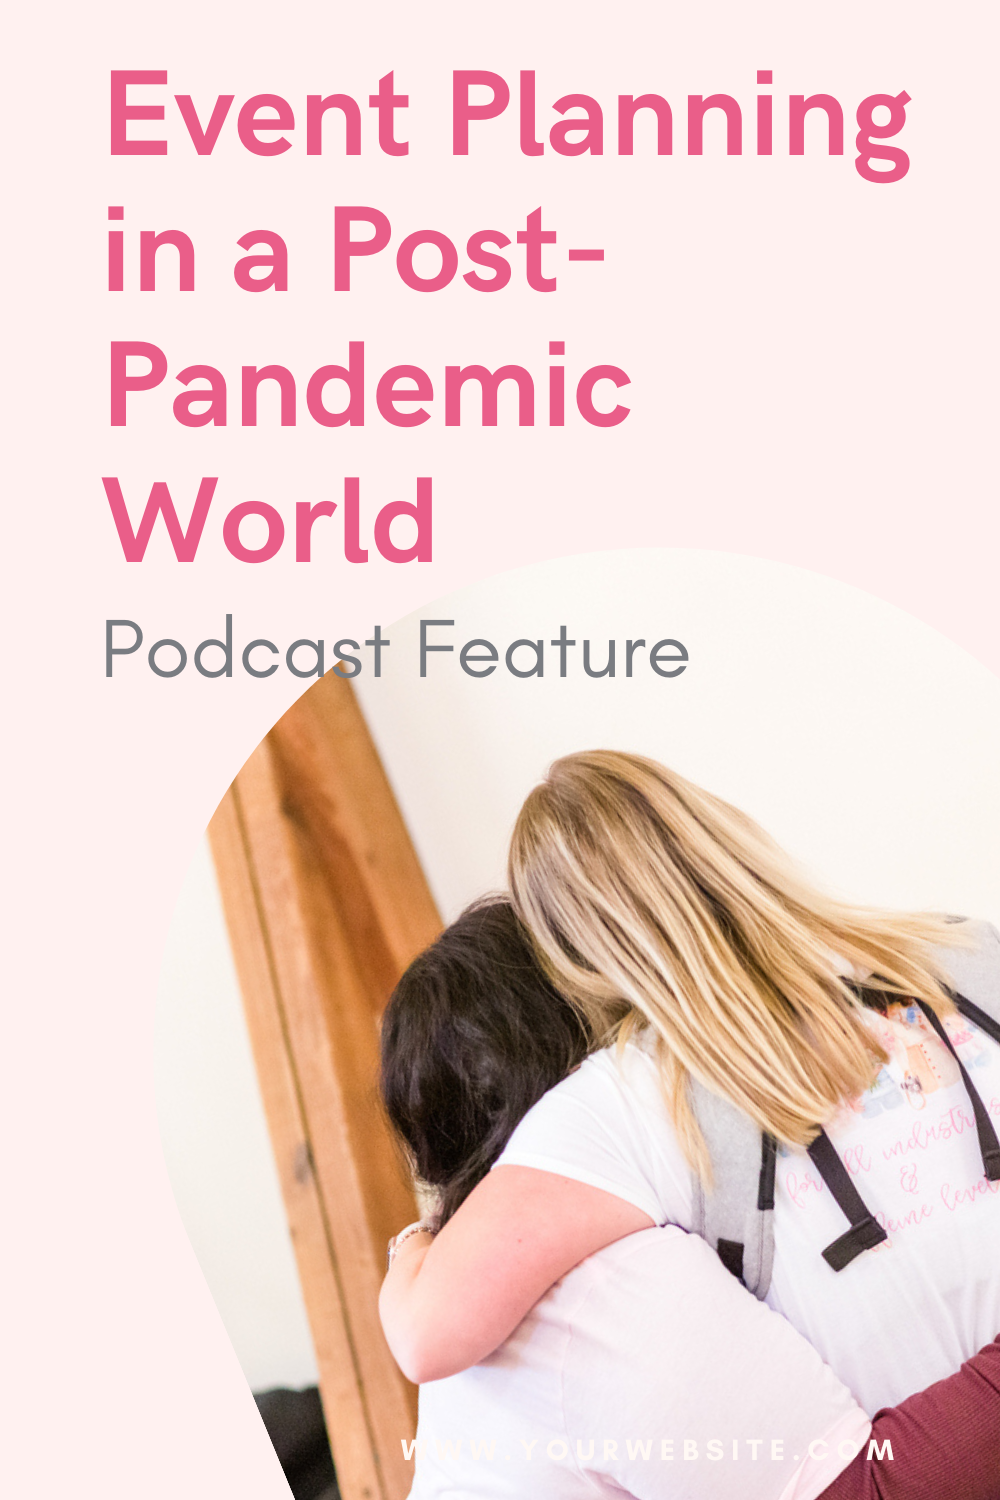 Event Planning in a Post-Pandemic World